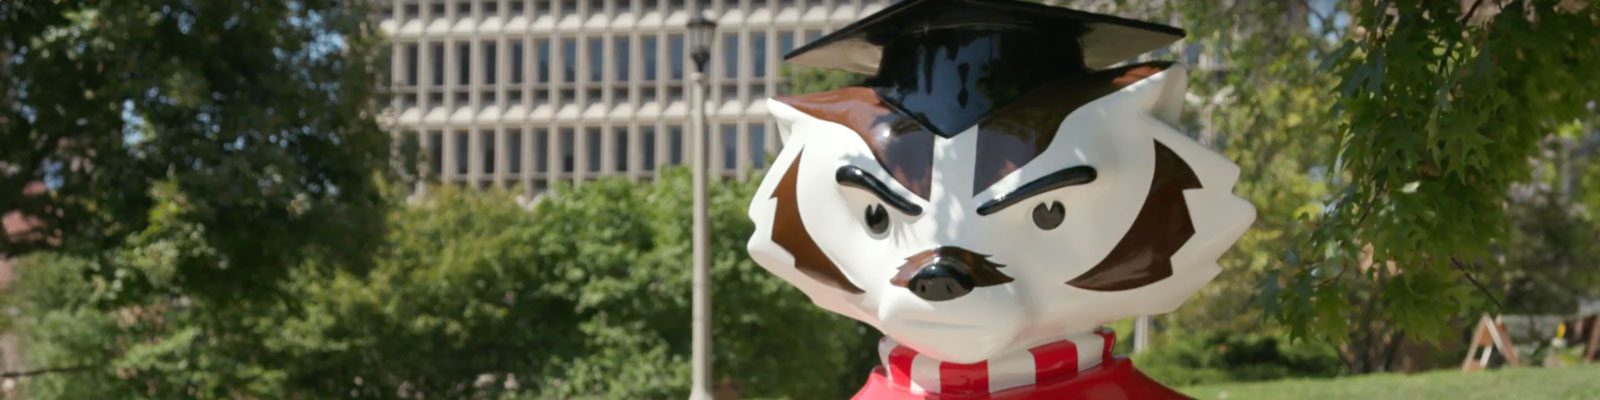 Statue of Bucky Badger in front of the university